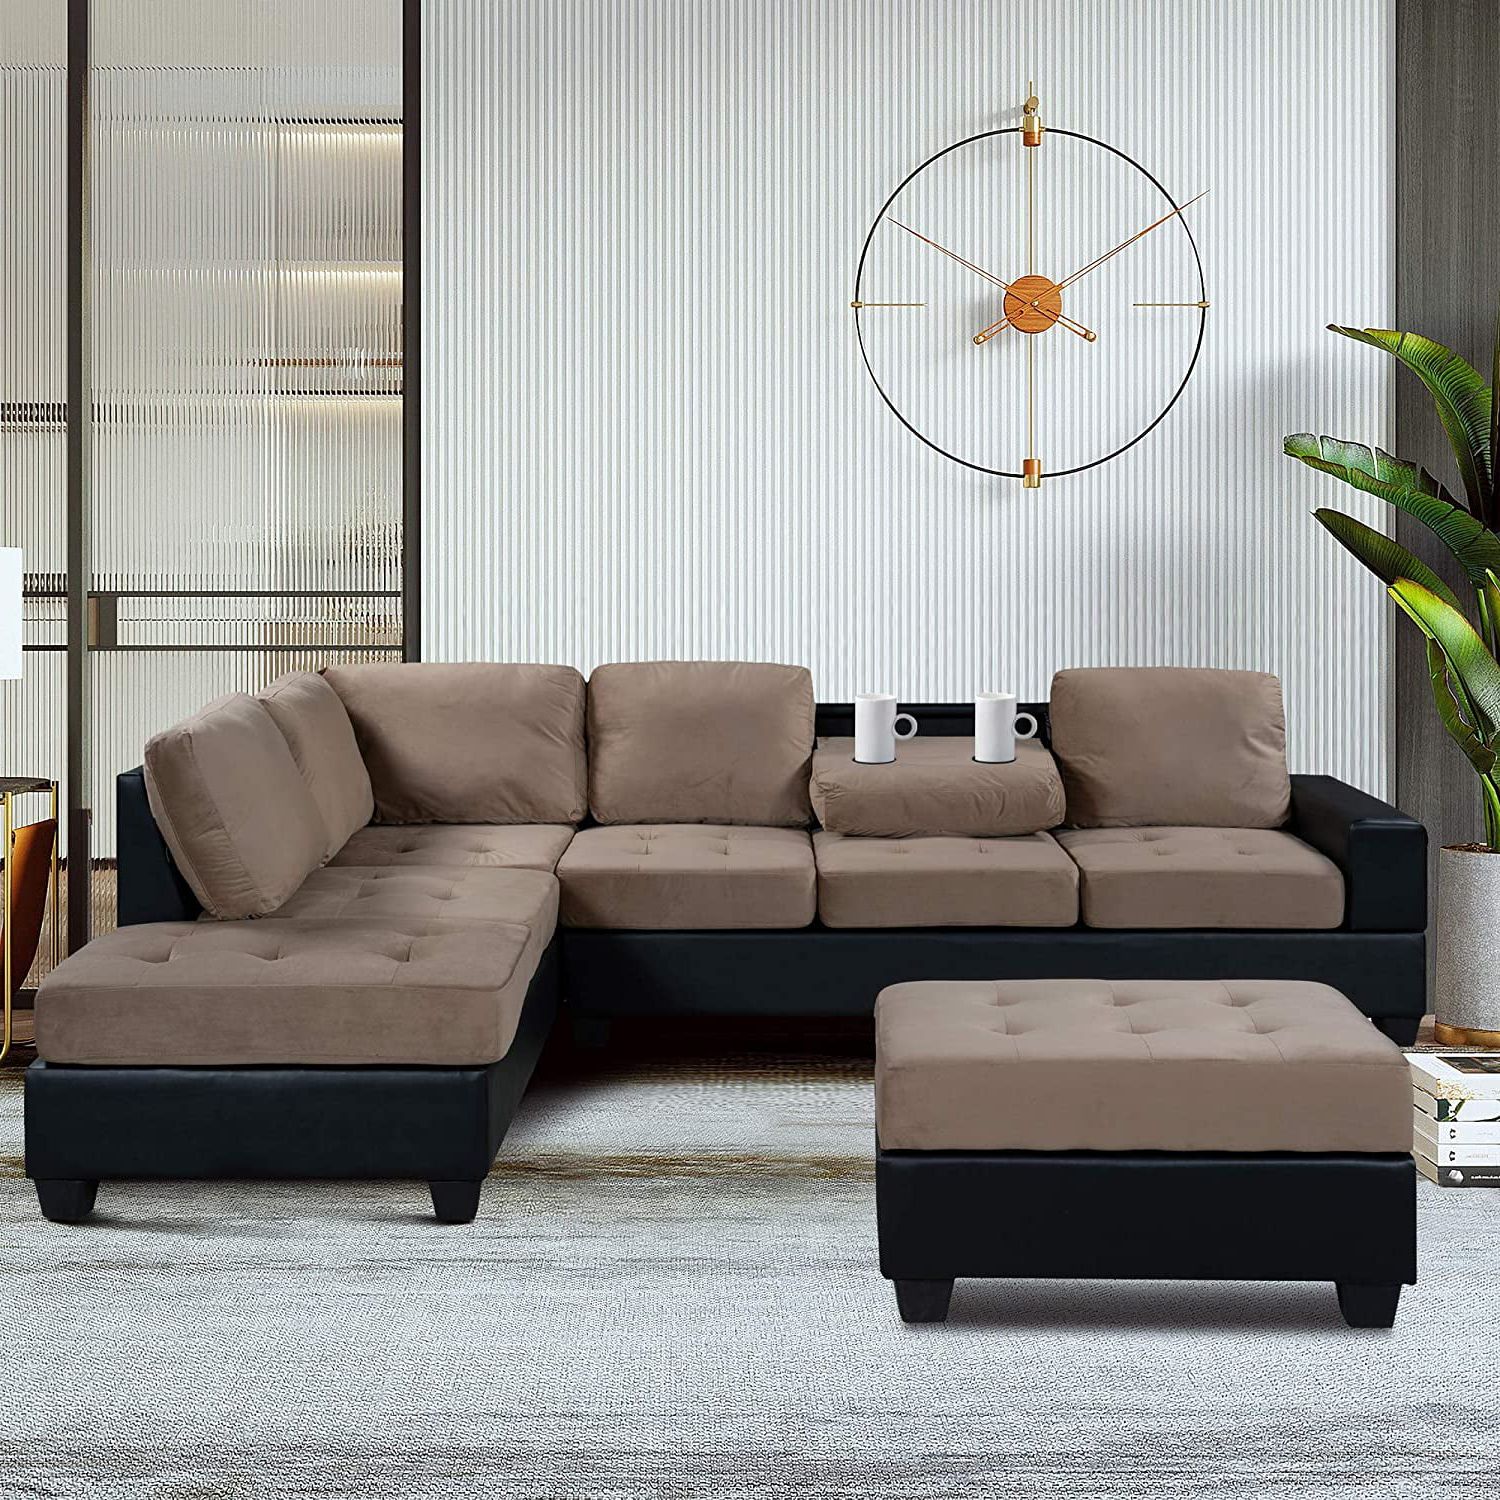 3 Piece Convertible Sectional Sofa L Shaped Couch With Reversible With Preferred L Shape Couches With Reversible Chaises (View 9 of 15)